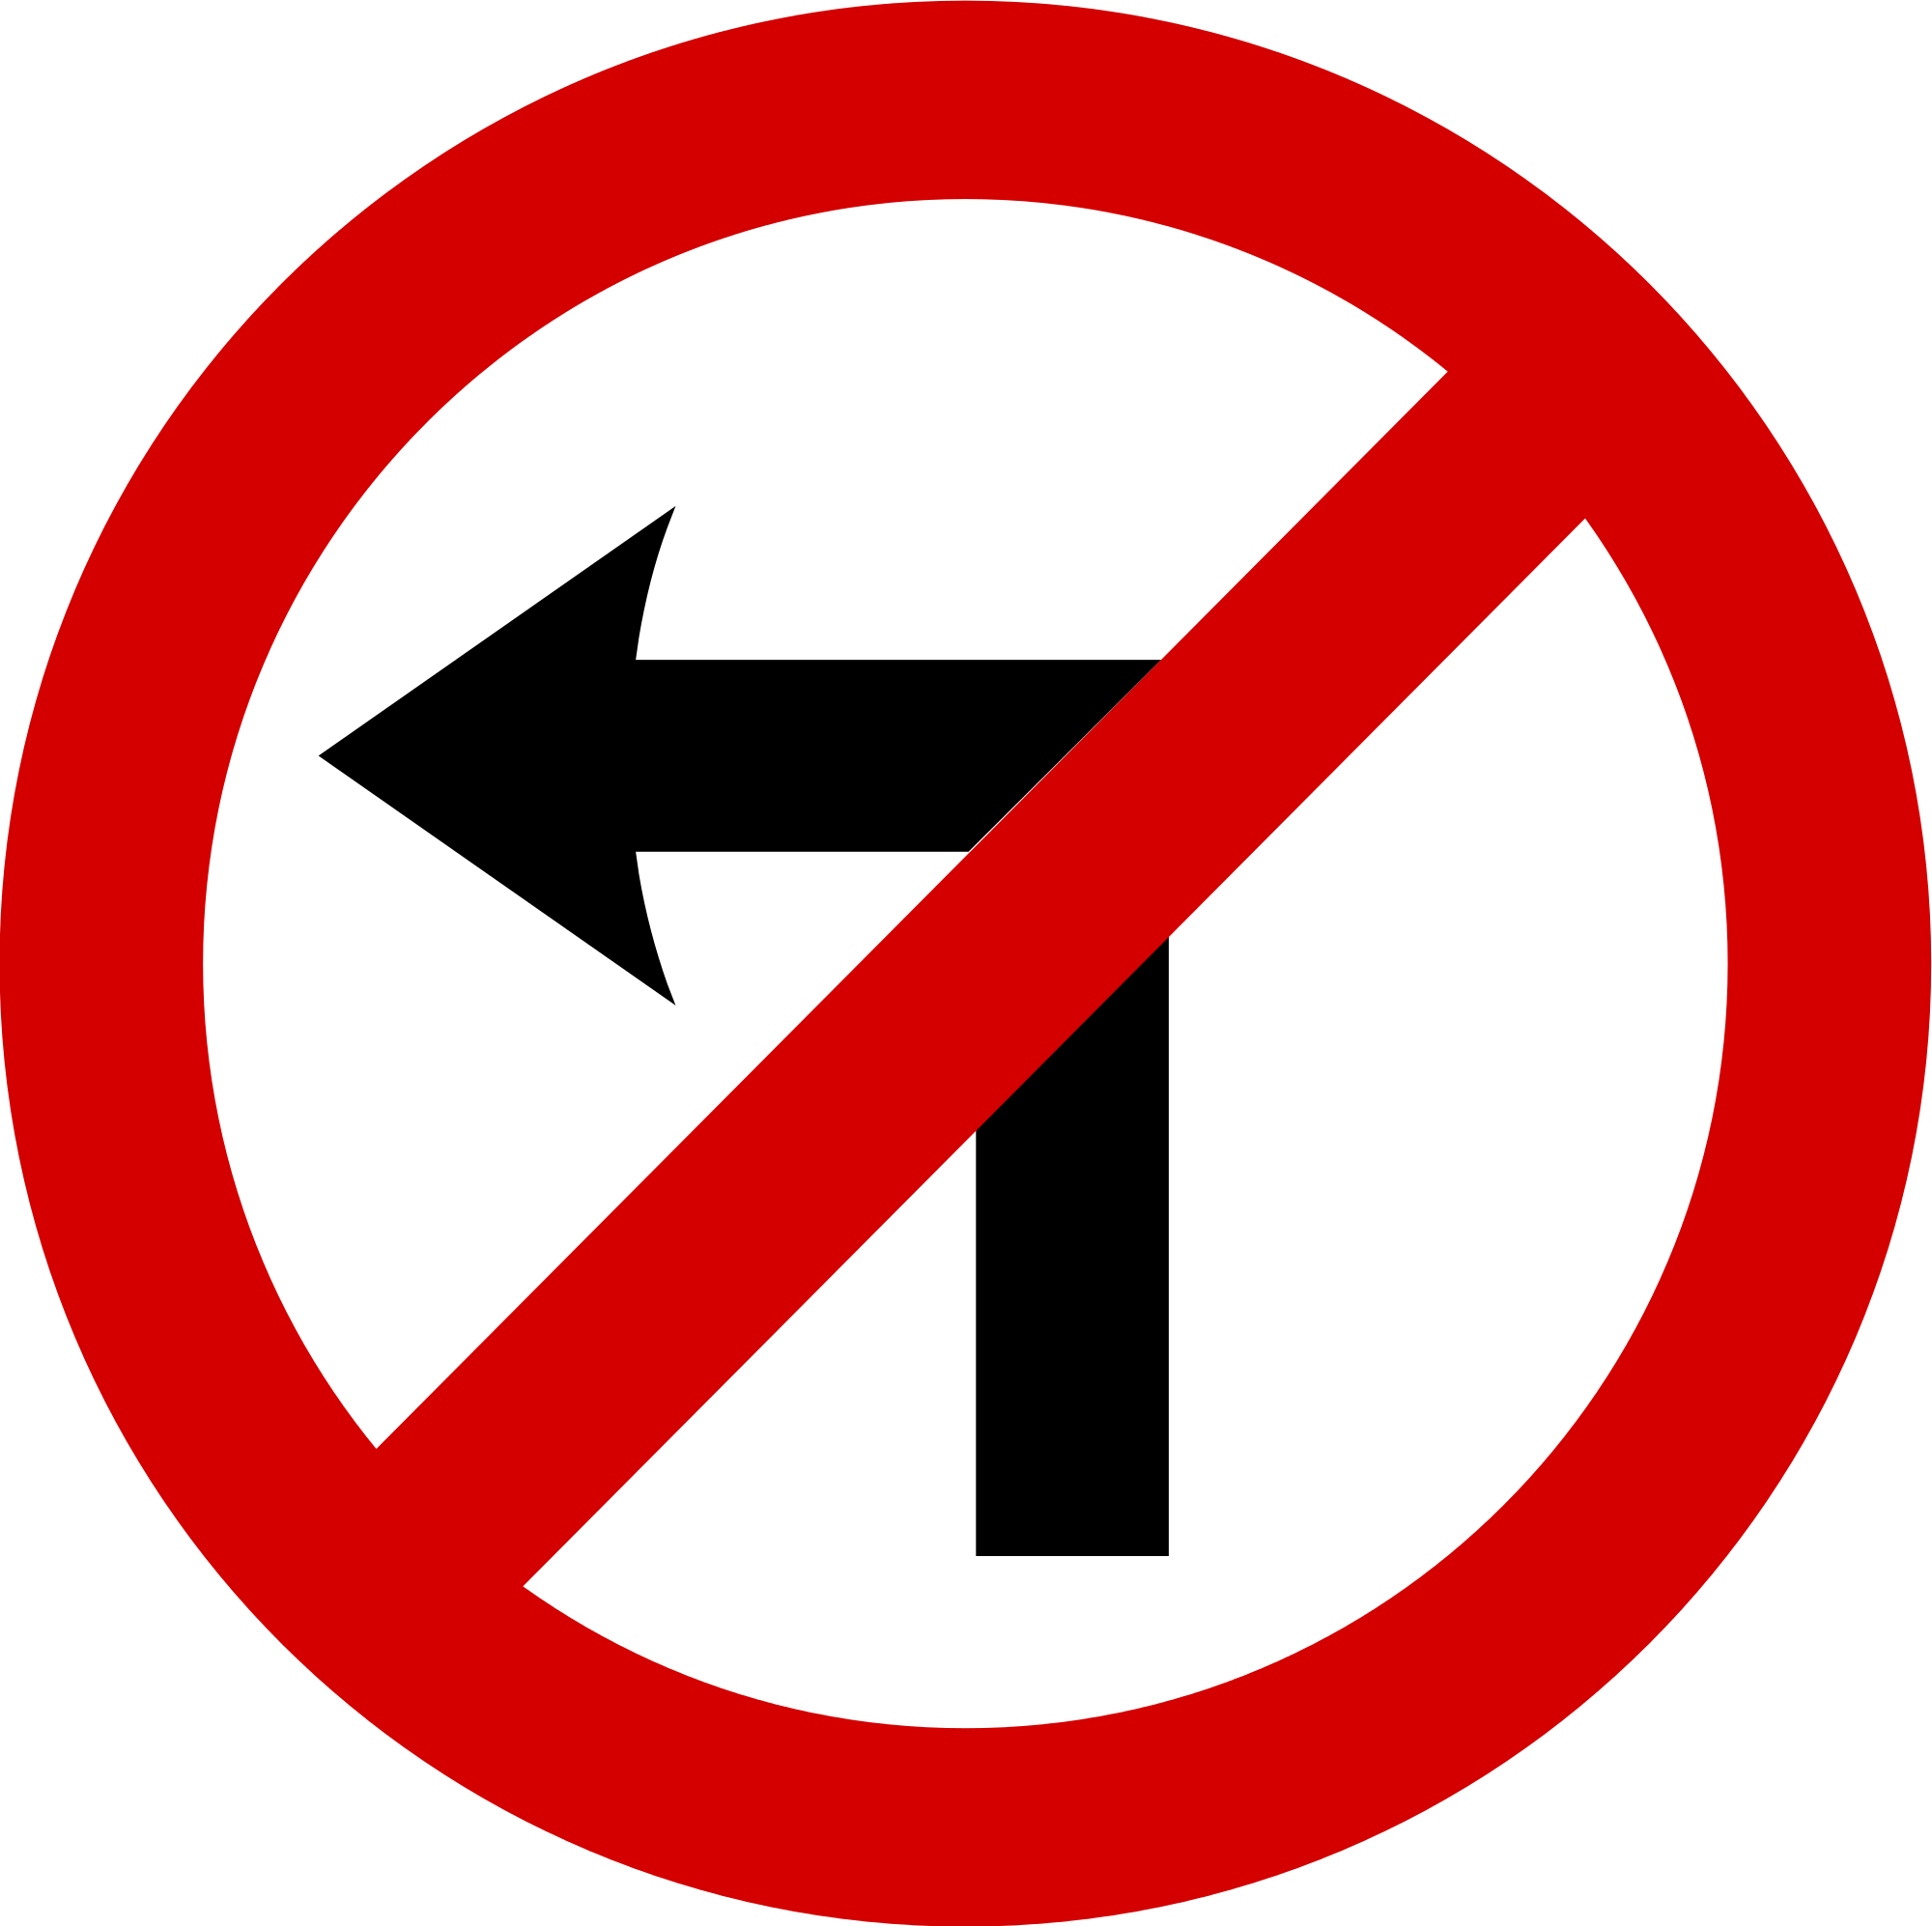 Open - No Left Turn Sign (2000x1994)